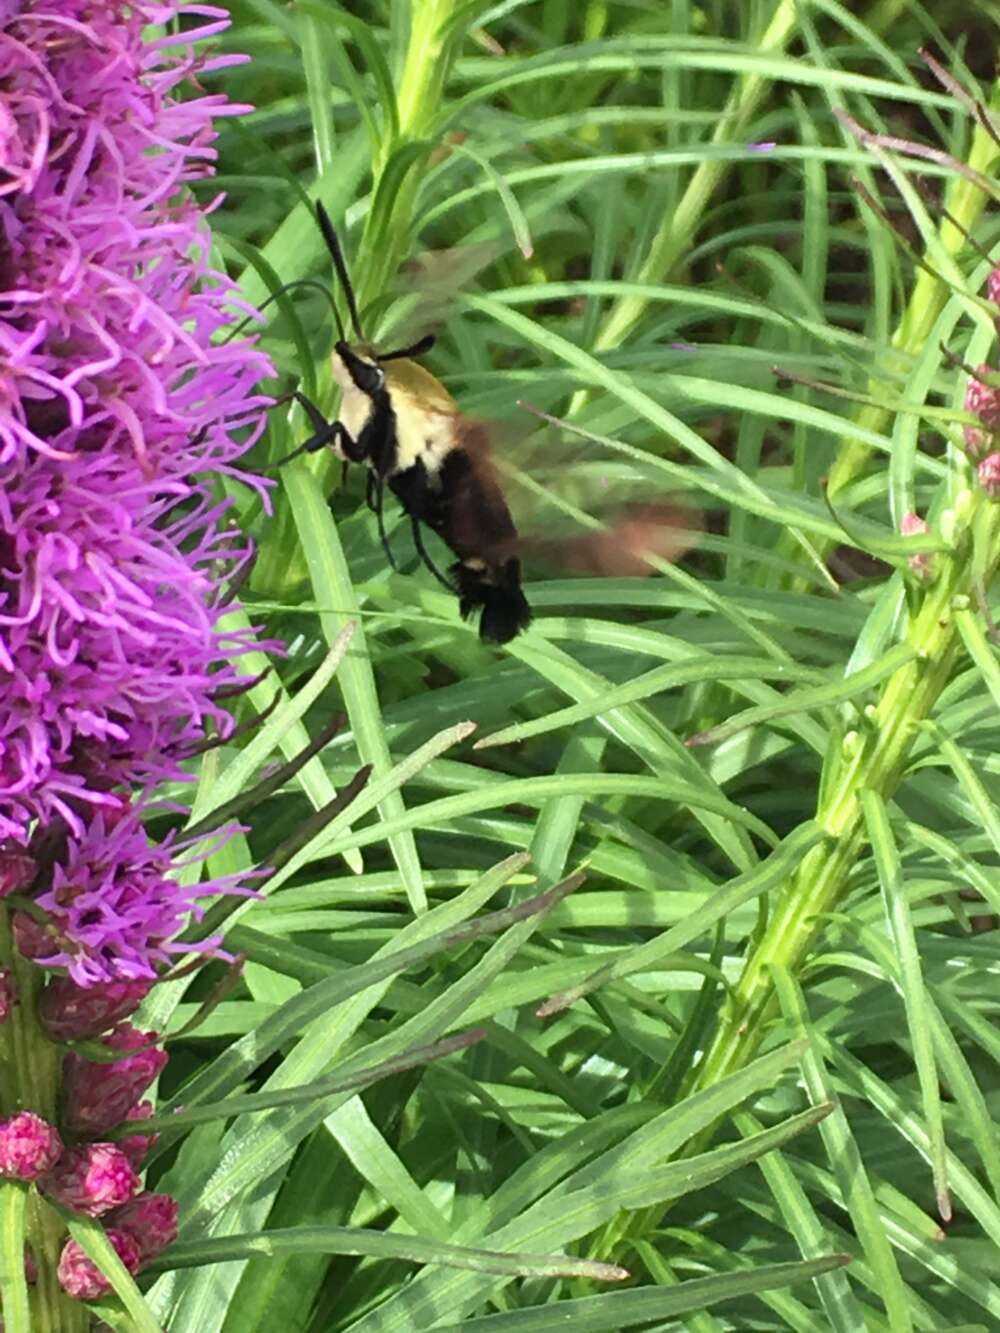 This snowberry clearwing was nectaring on northern blazing star in the Native Plant Border on July 25, 2018.